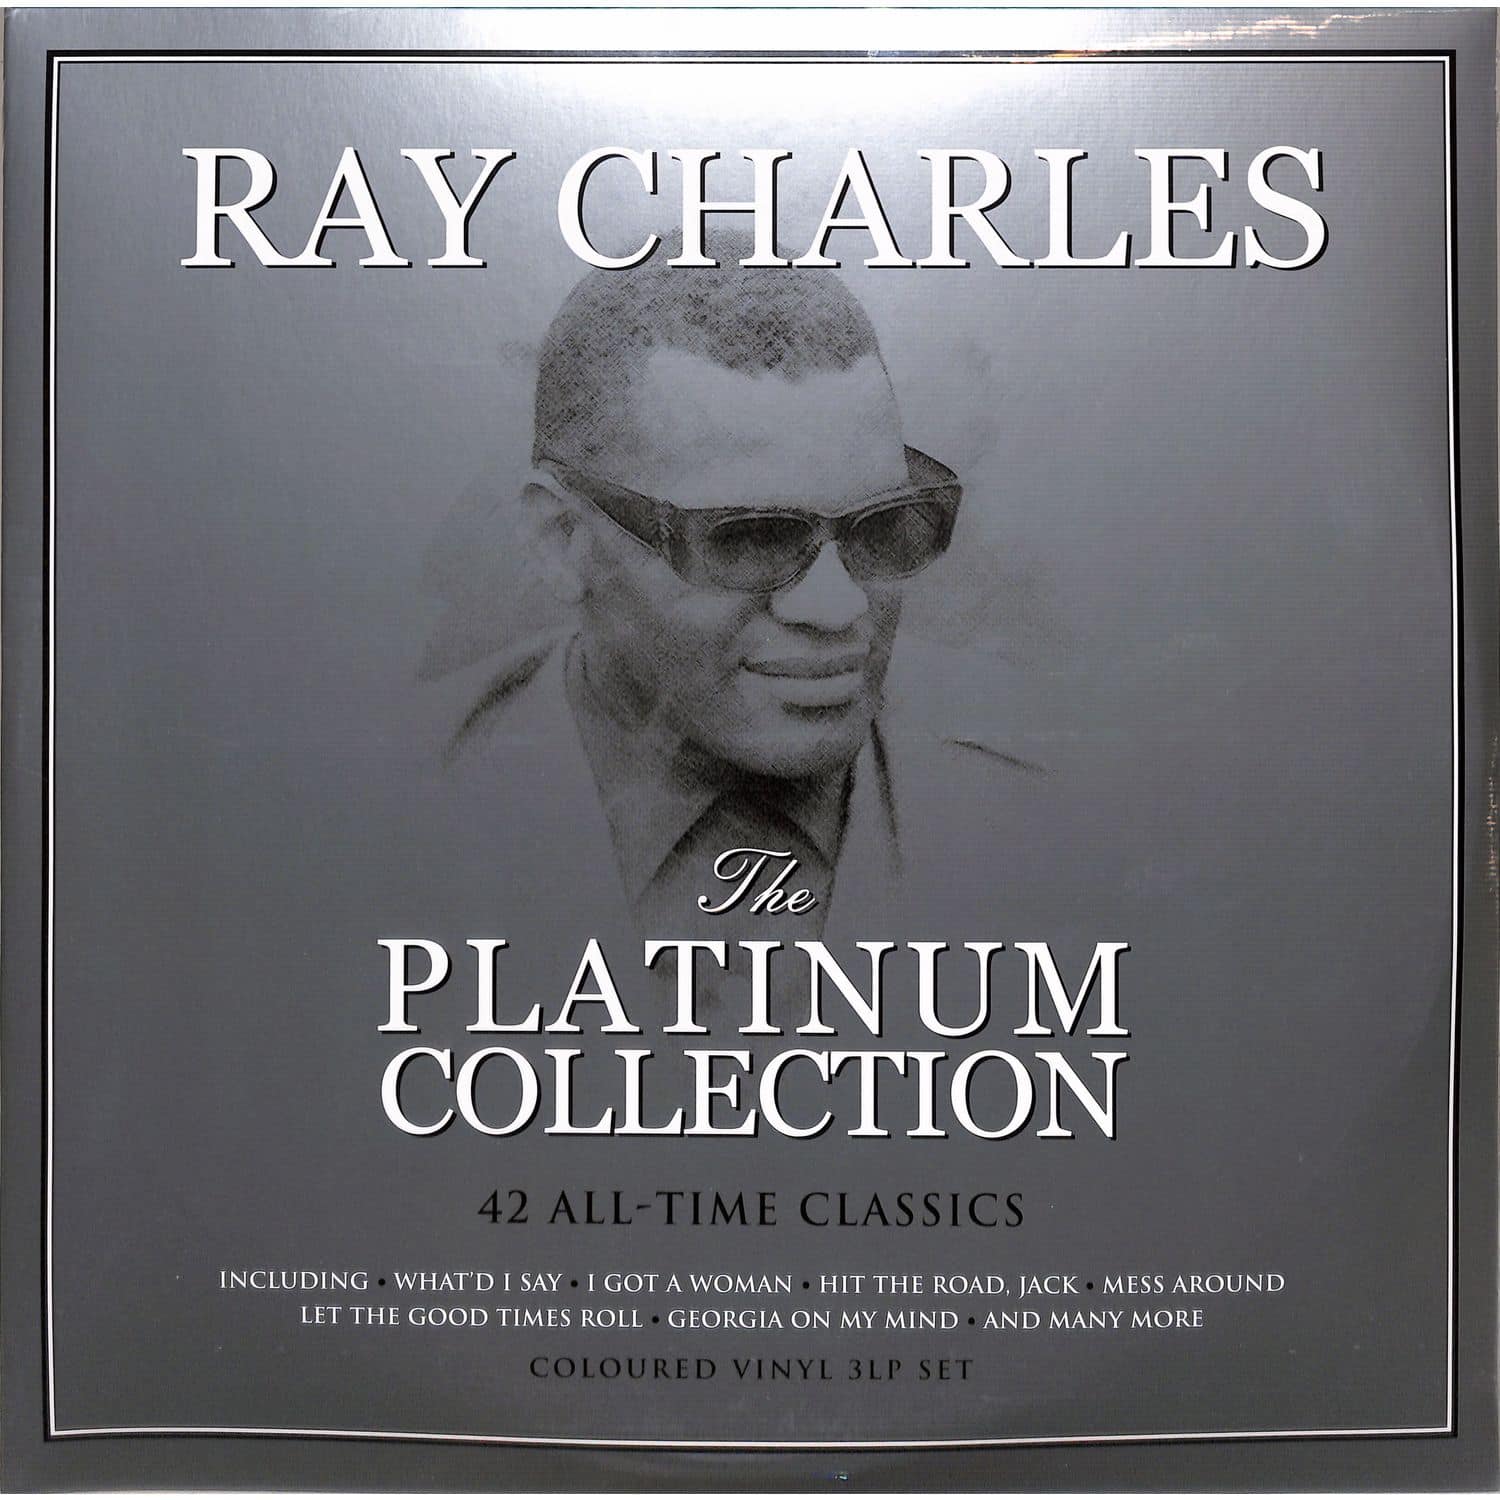 Ray Charles - PLATINUM COLLECTION 